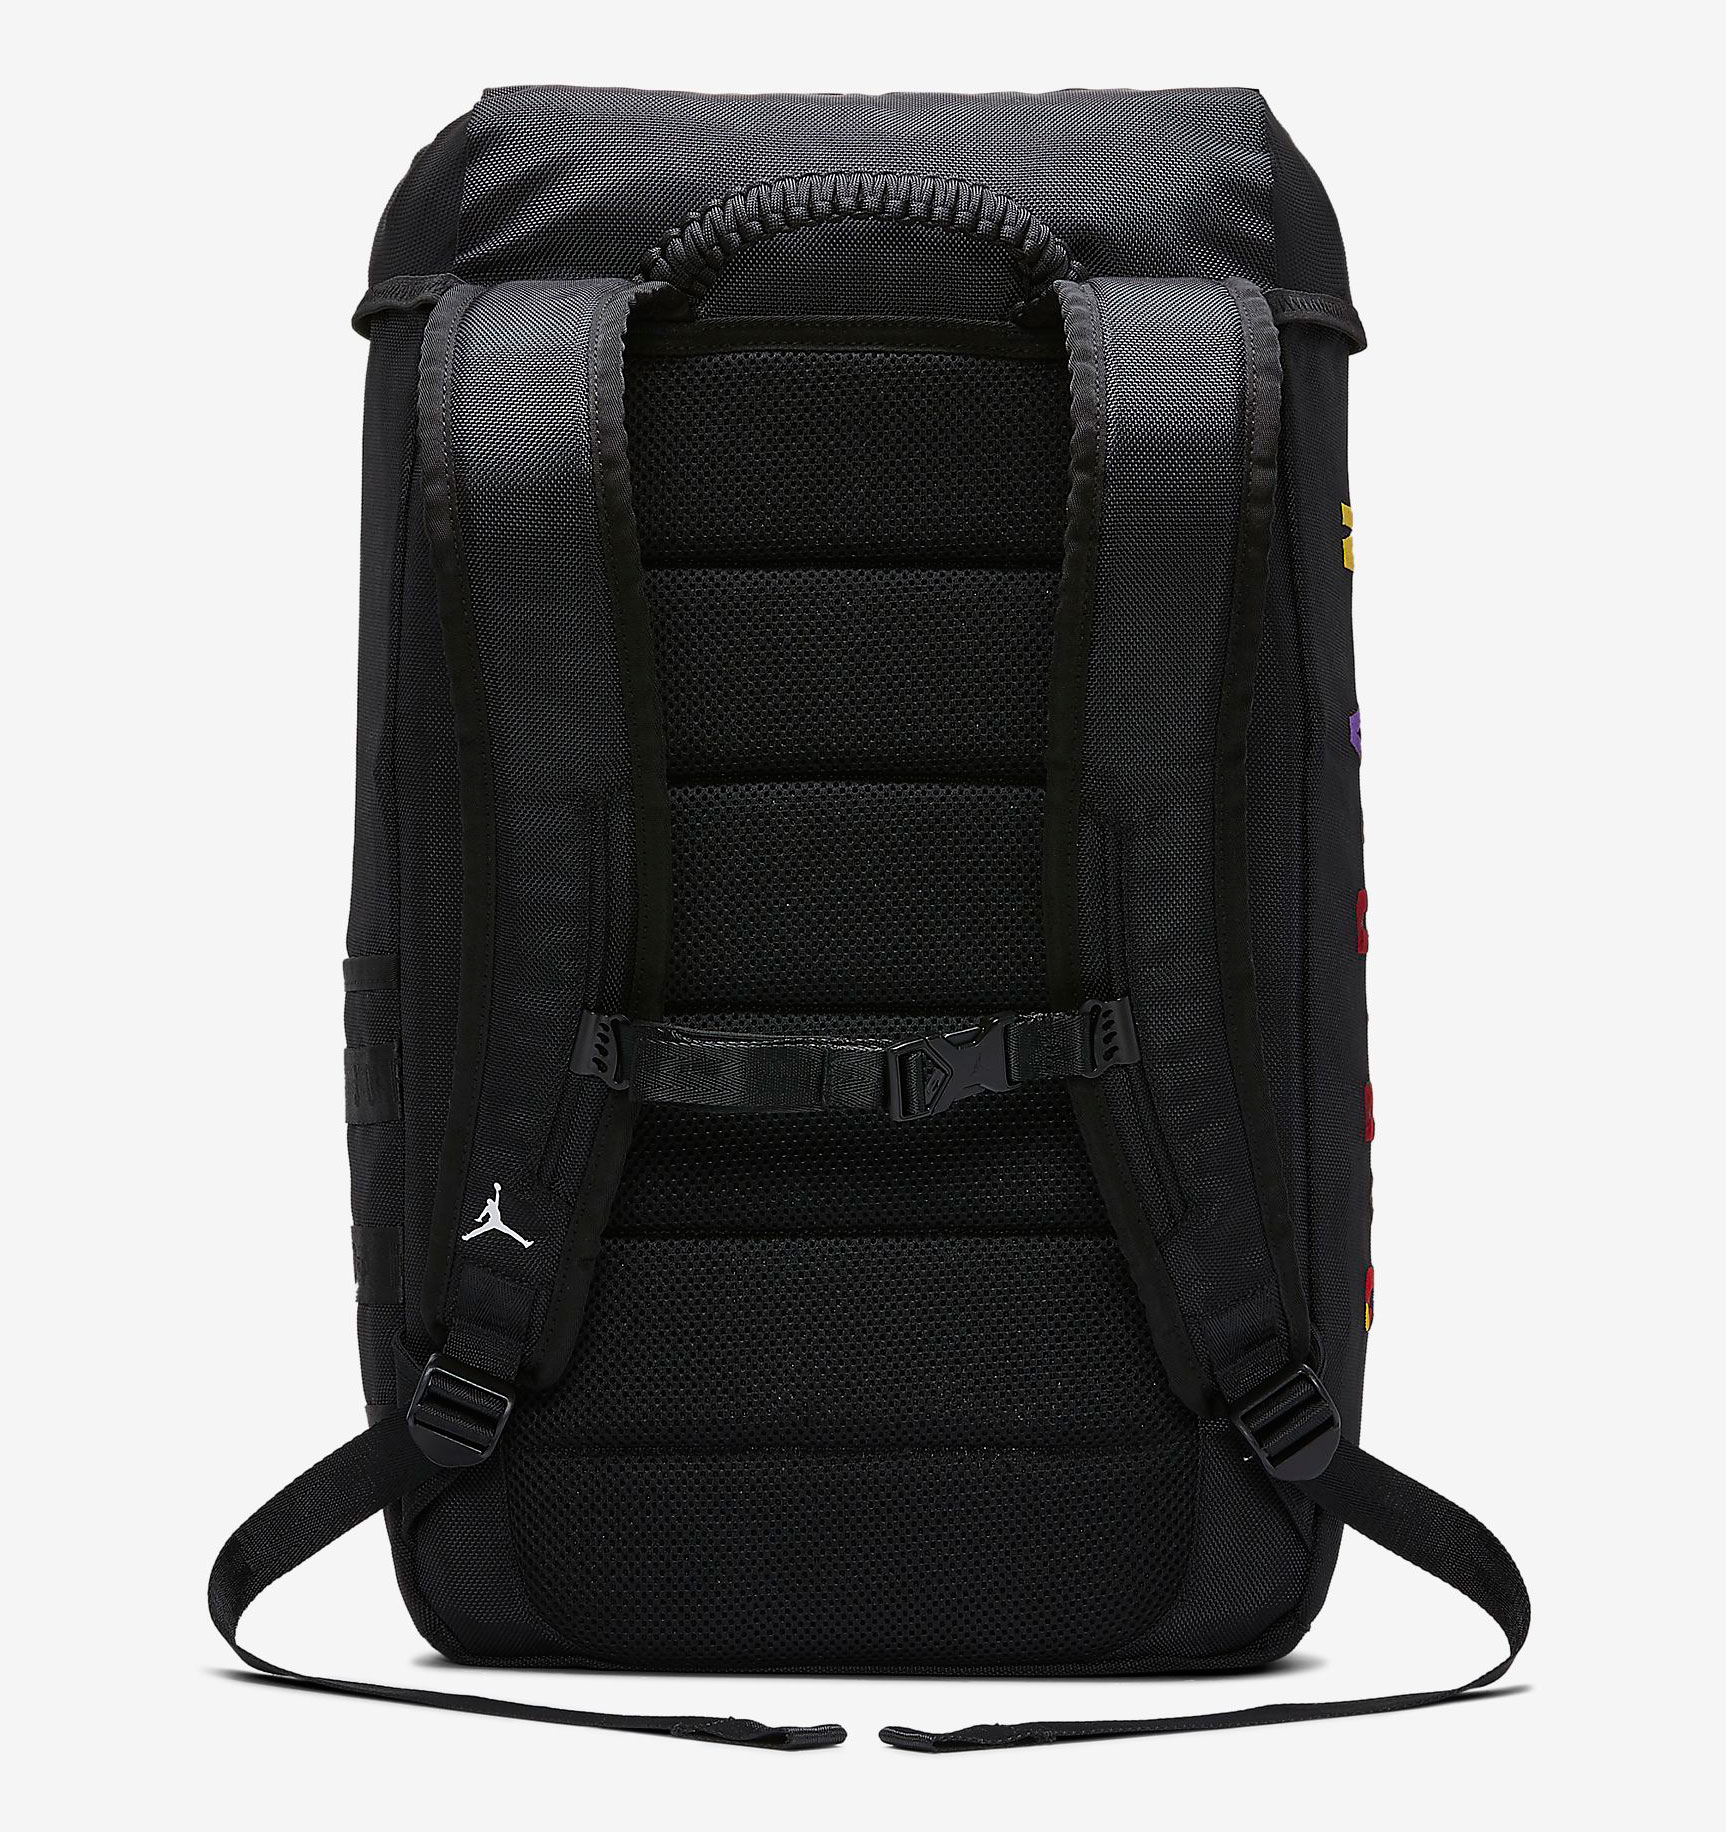 Air Jordan 1 Mid Rivals Backpack and Bags to Match | SneakerFits.com